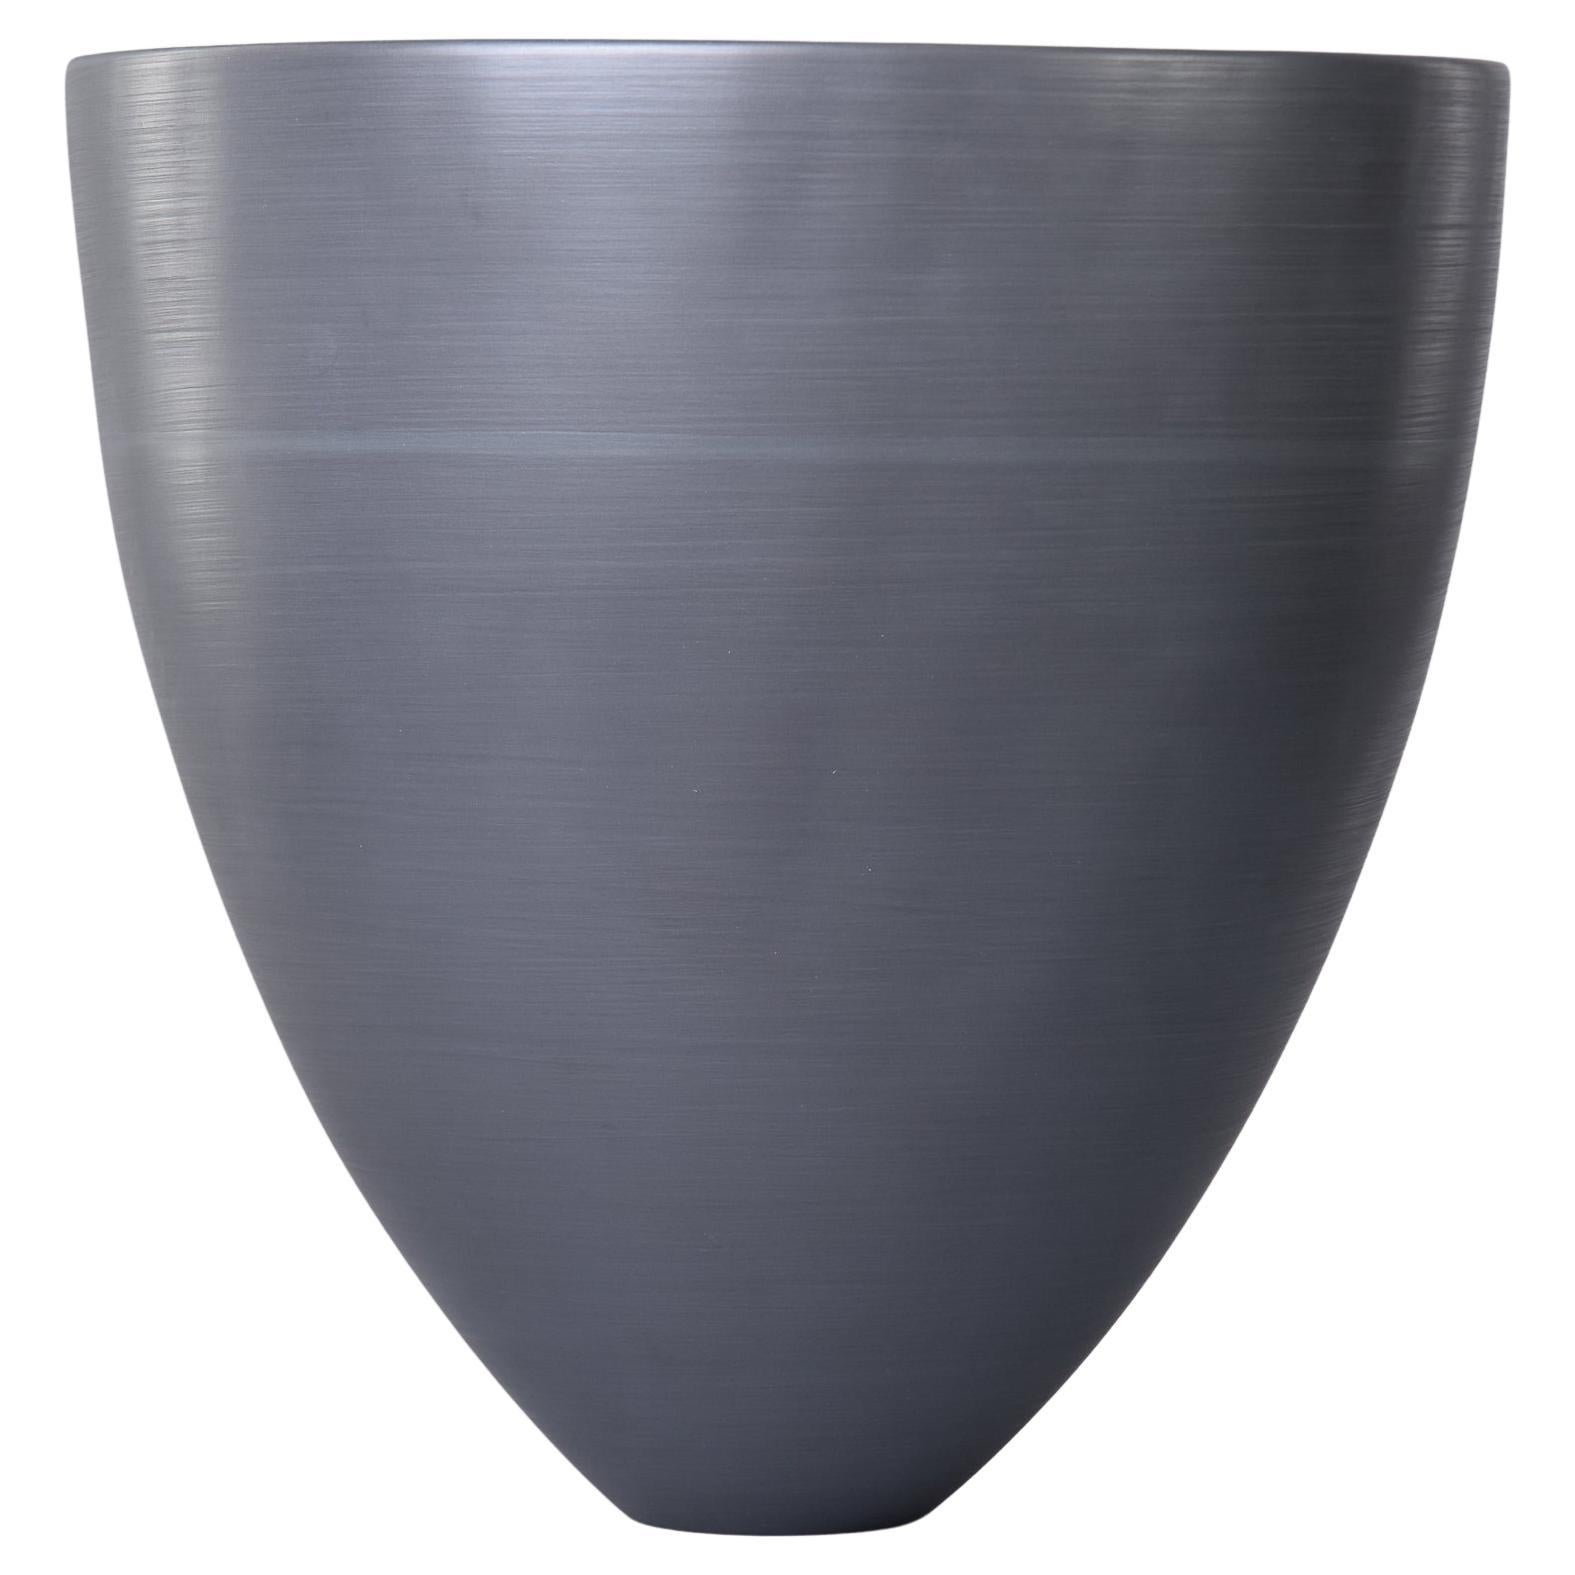 New Rina Menardi Large Cup Form Bowl or Vase in Graphite For Sale